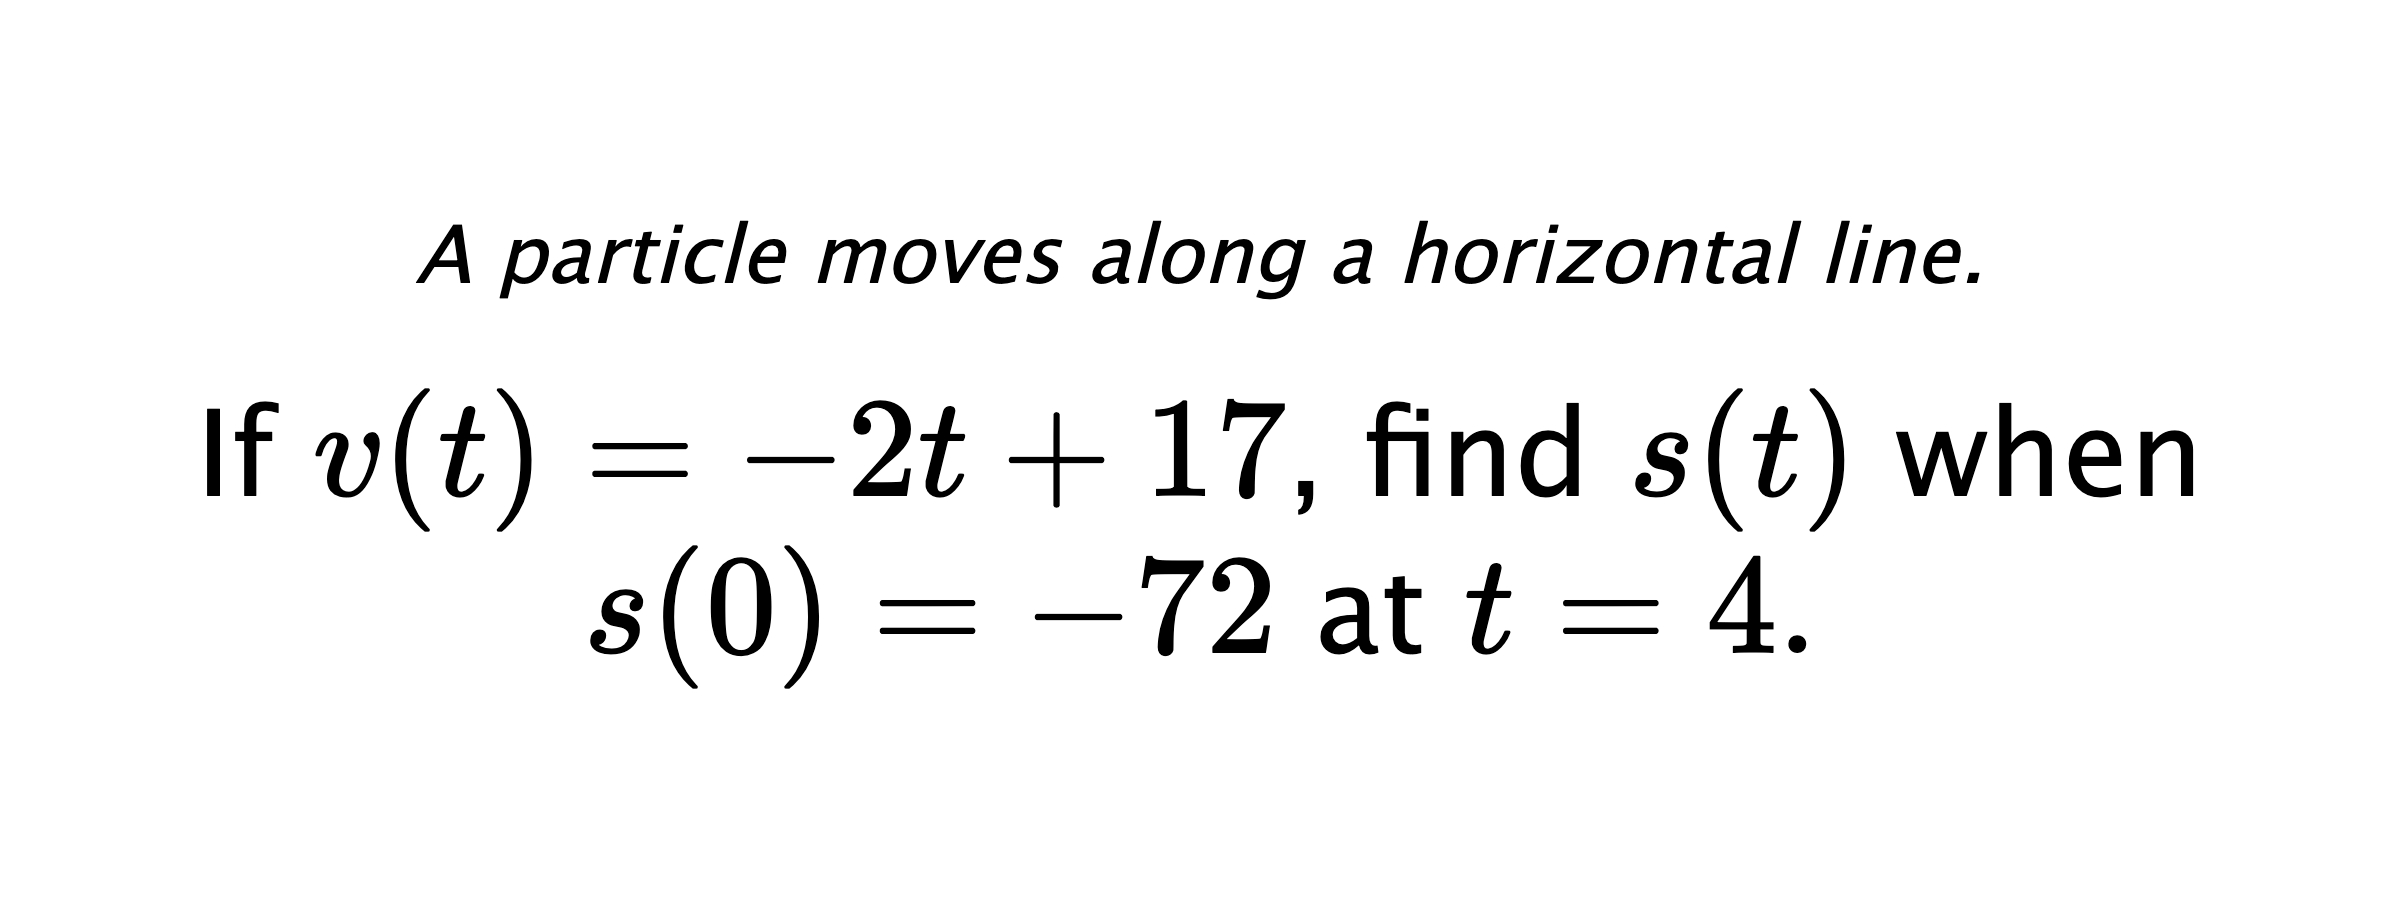 A particle moves along a horizontal line. If $ v(t)=-2t+17 $, find $ s(t) $ when $ s(0)=-72 $ at $ t=4 .$